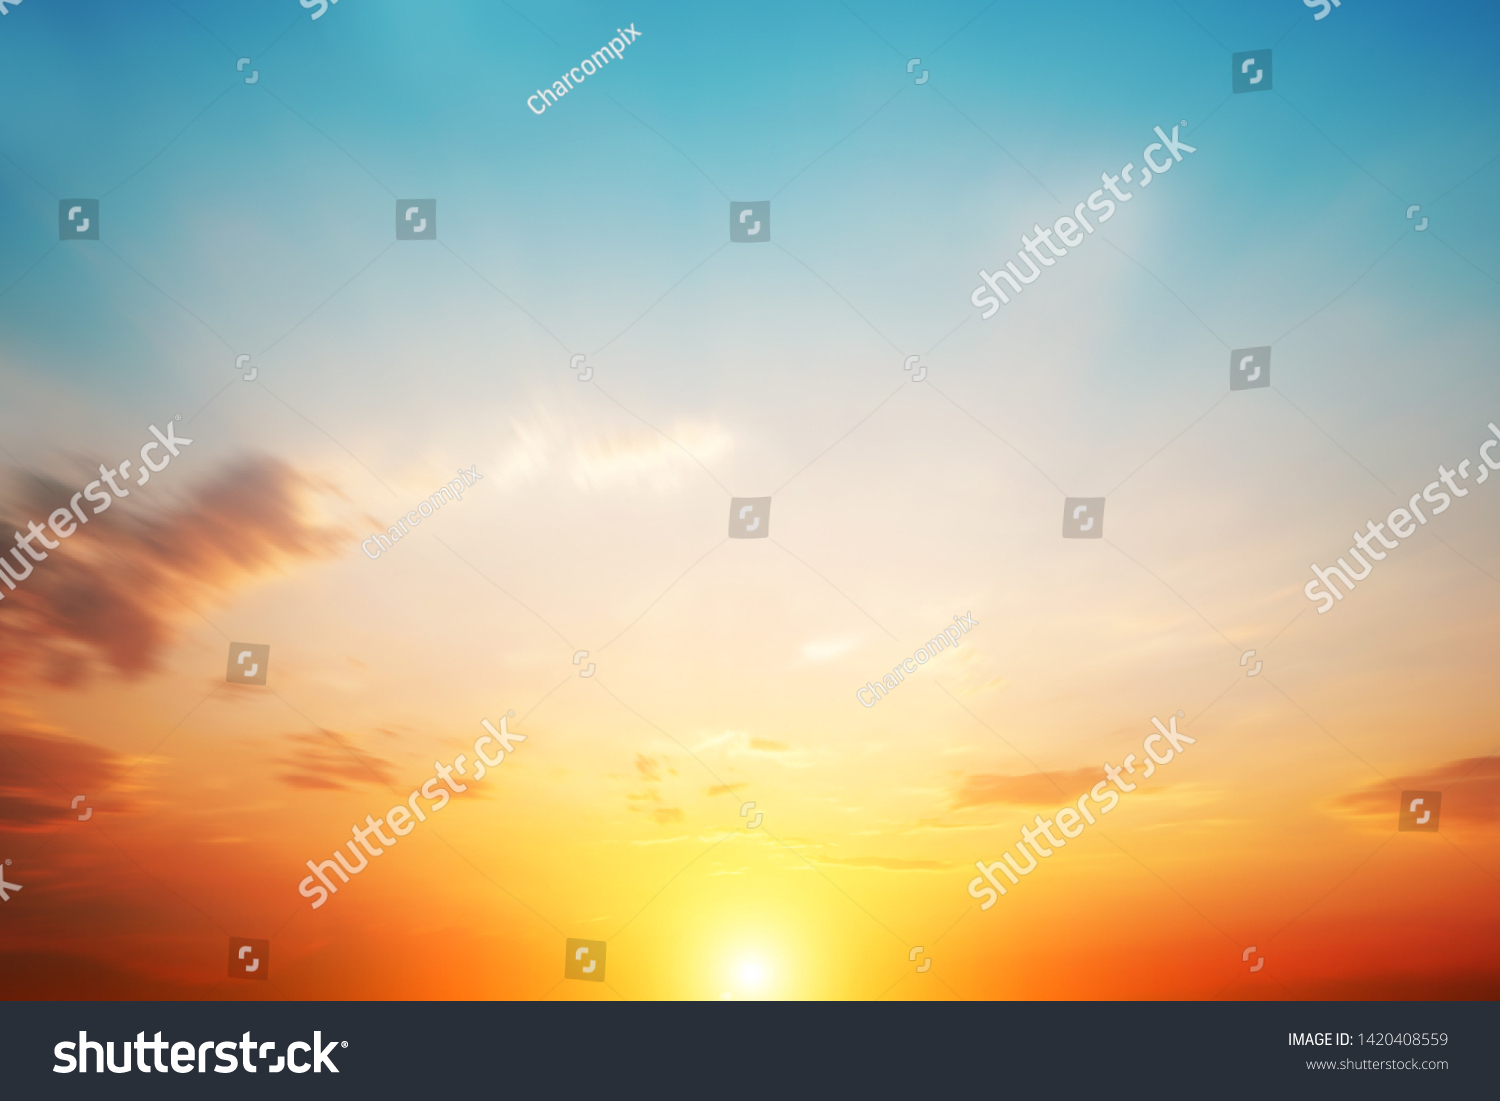 Blur pastels gradient sunset background on soft nature sunrise peaceful morning beach outdoor. heavenly mind view at a resort deck touching sunshine, sky summer clouds. #1420408559